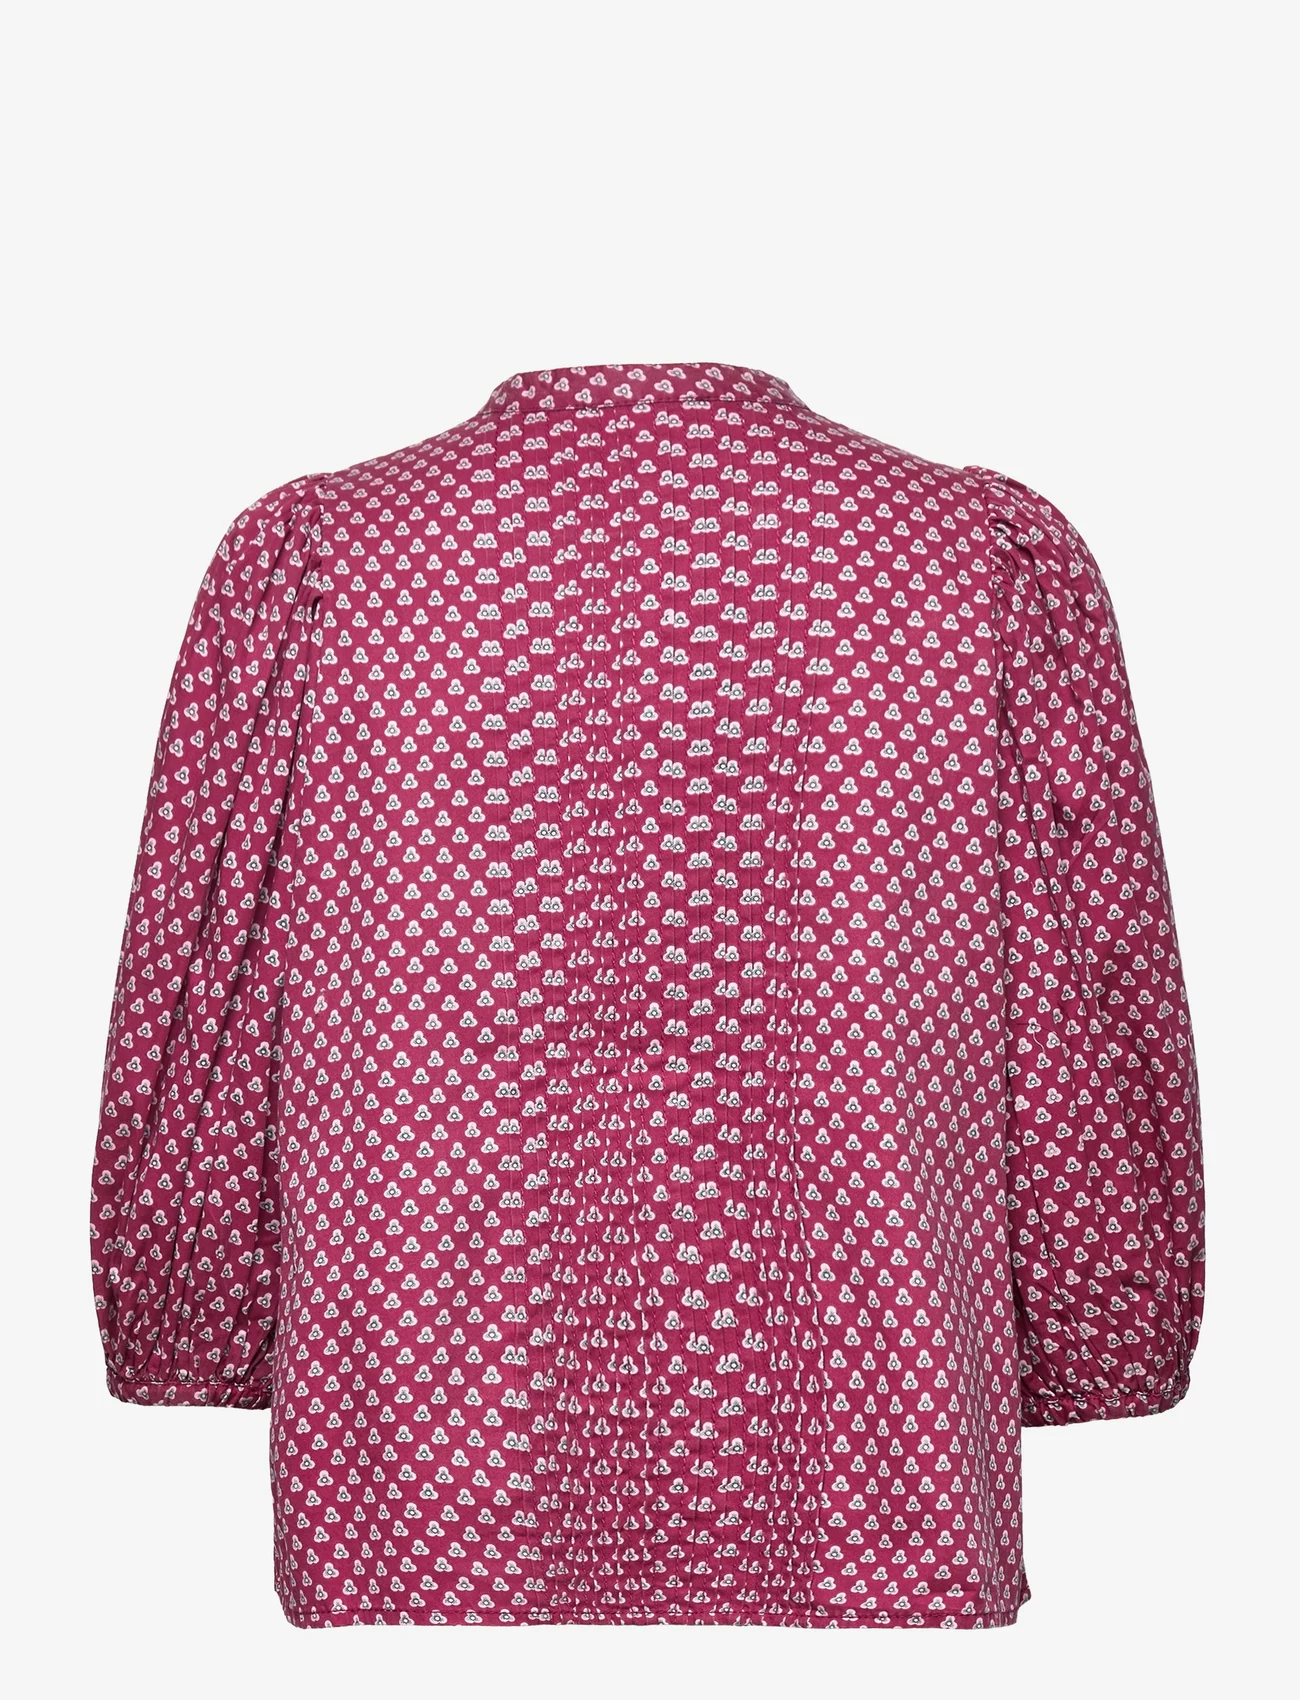 by Ti Mo - Structured Cotton Shirt - lyhythihaiset puserot - floral dots - 1